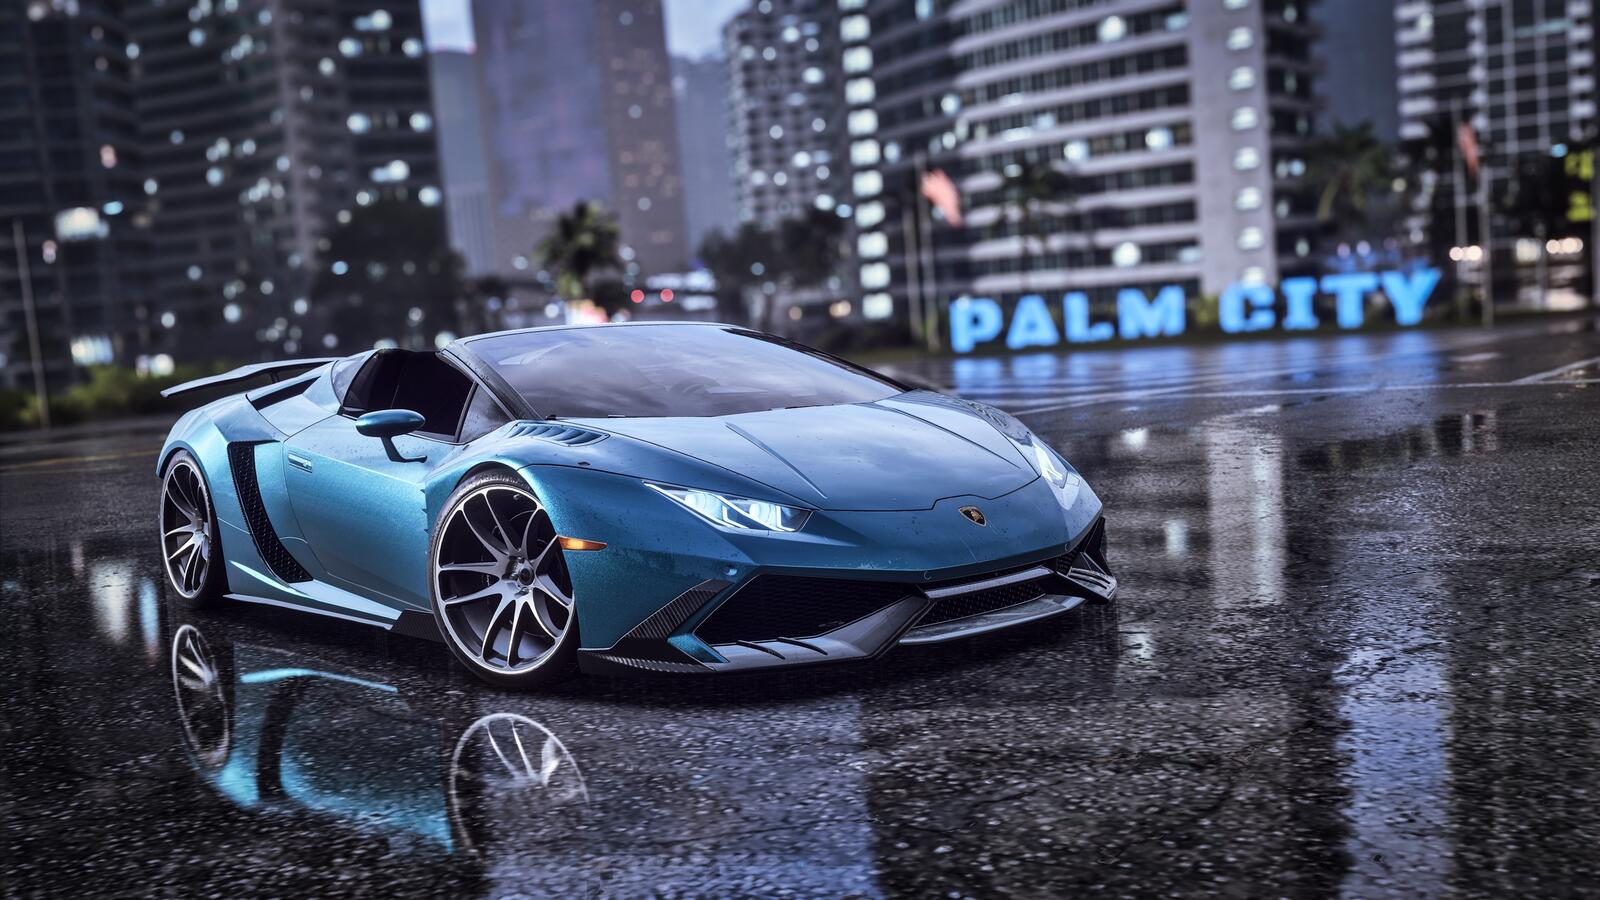 Wallpapers Need For Speed Heat Lamborghini palm city on the desktop